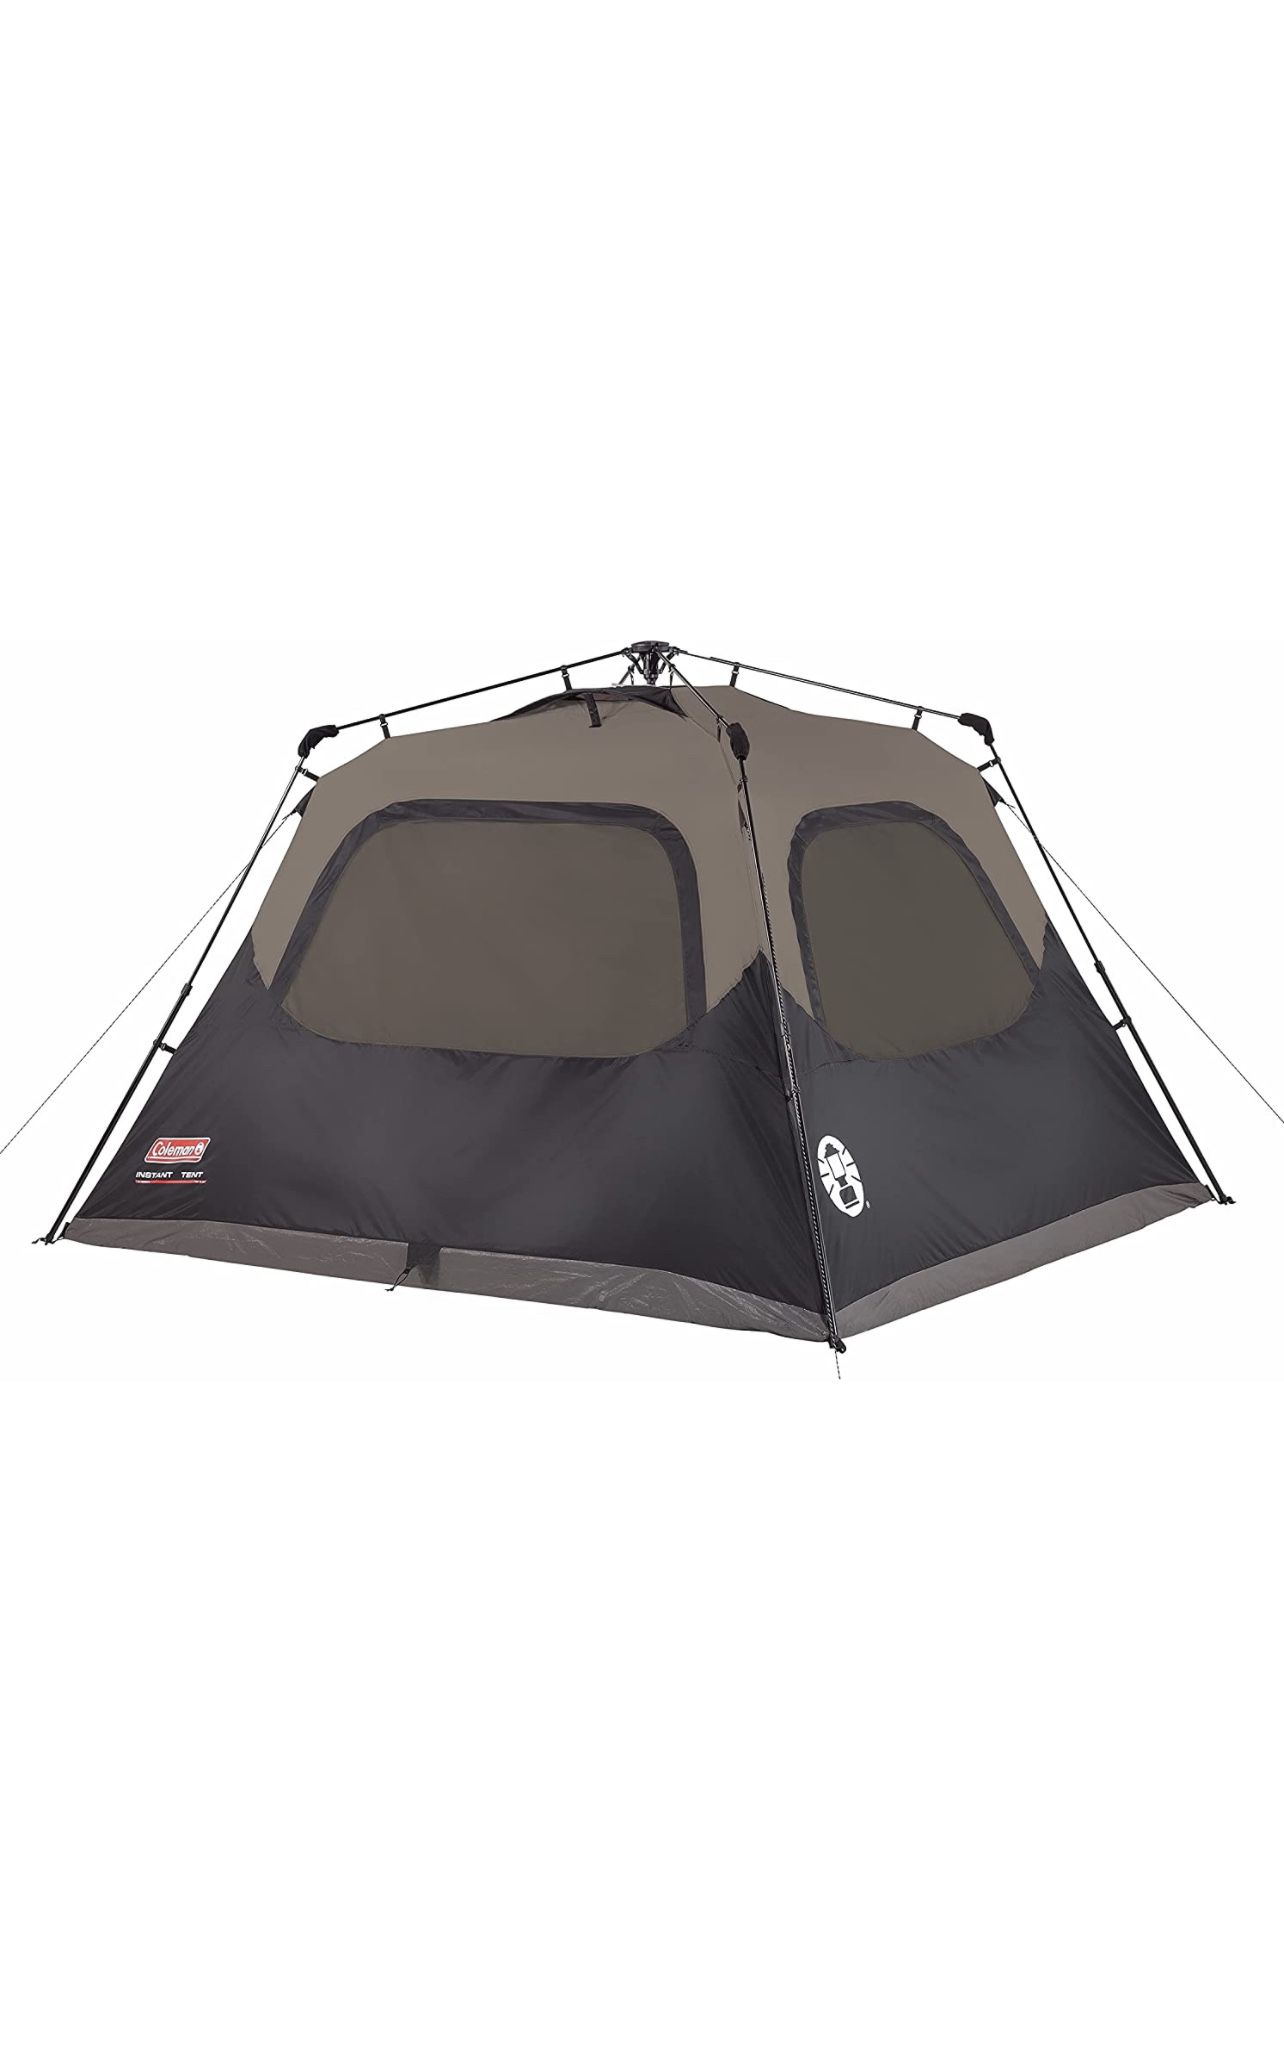 New Coleman Cabin Tent with Instant Setup in 60 Seconds 6-Person